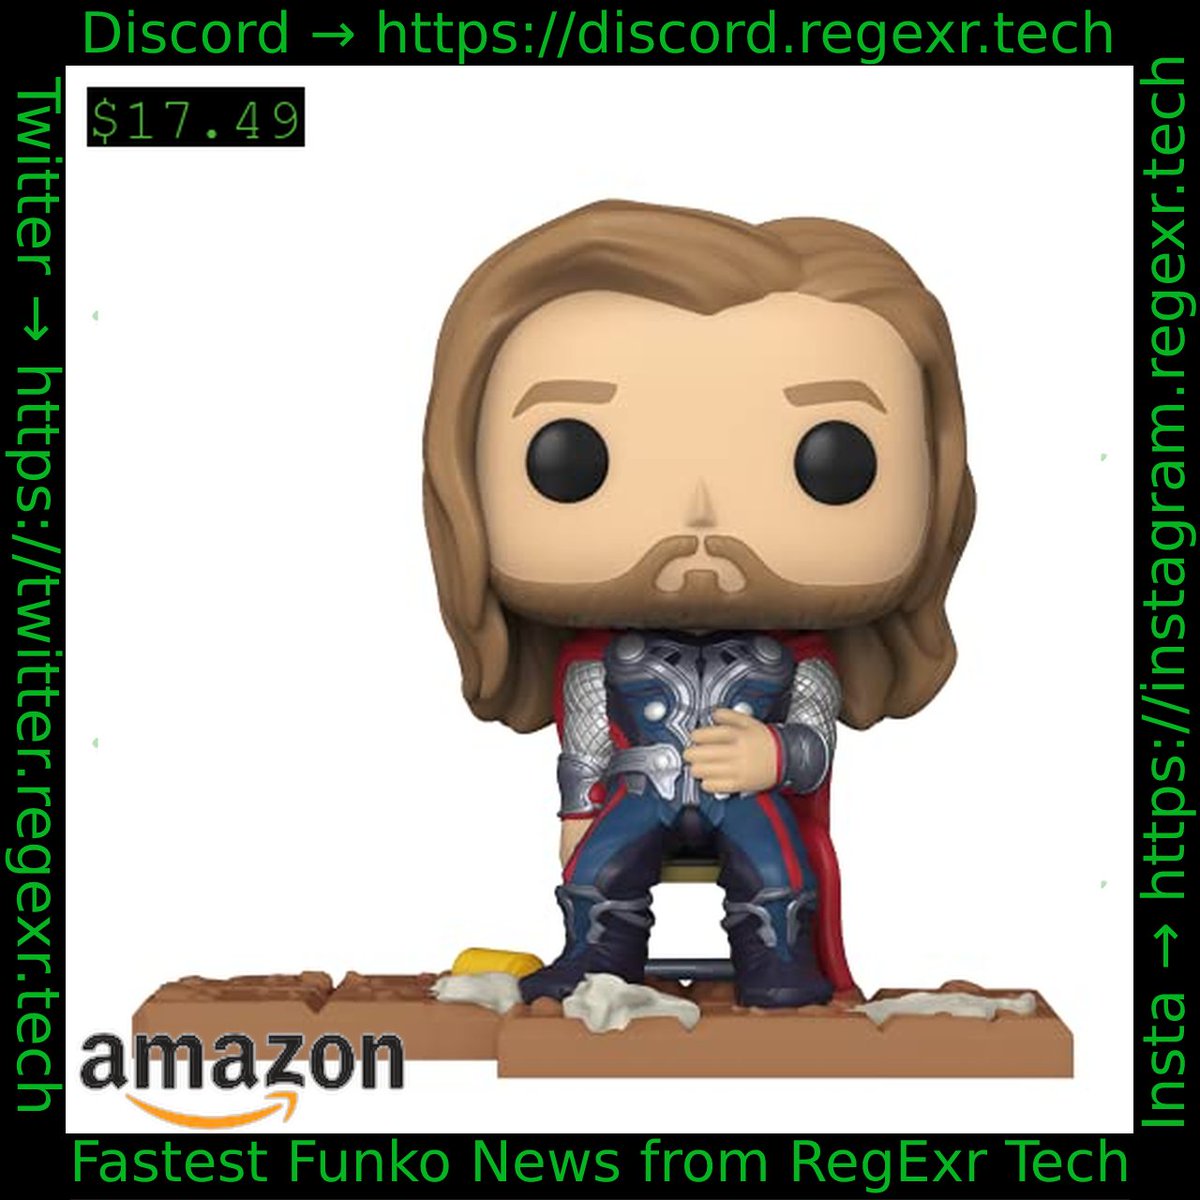 #funko  Deluxe : Avengers Victory Shawarma Series - Thor Multicolor Amazon 6 Of 6
Link->https://t.co/aLyq7AKOU3
14:16:46 2022-12-18 UTC
*Free Shipping for Prime Members* https://t.co/mz2IwQTIFD